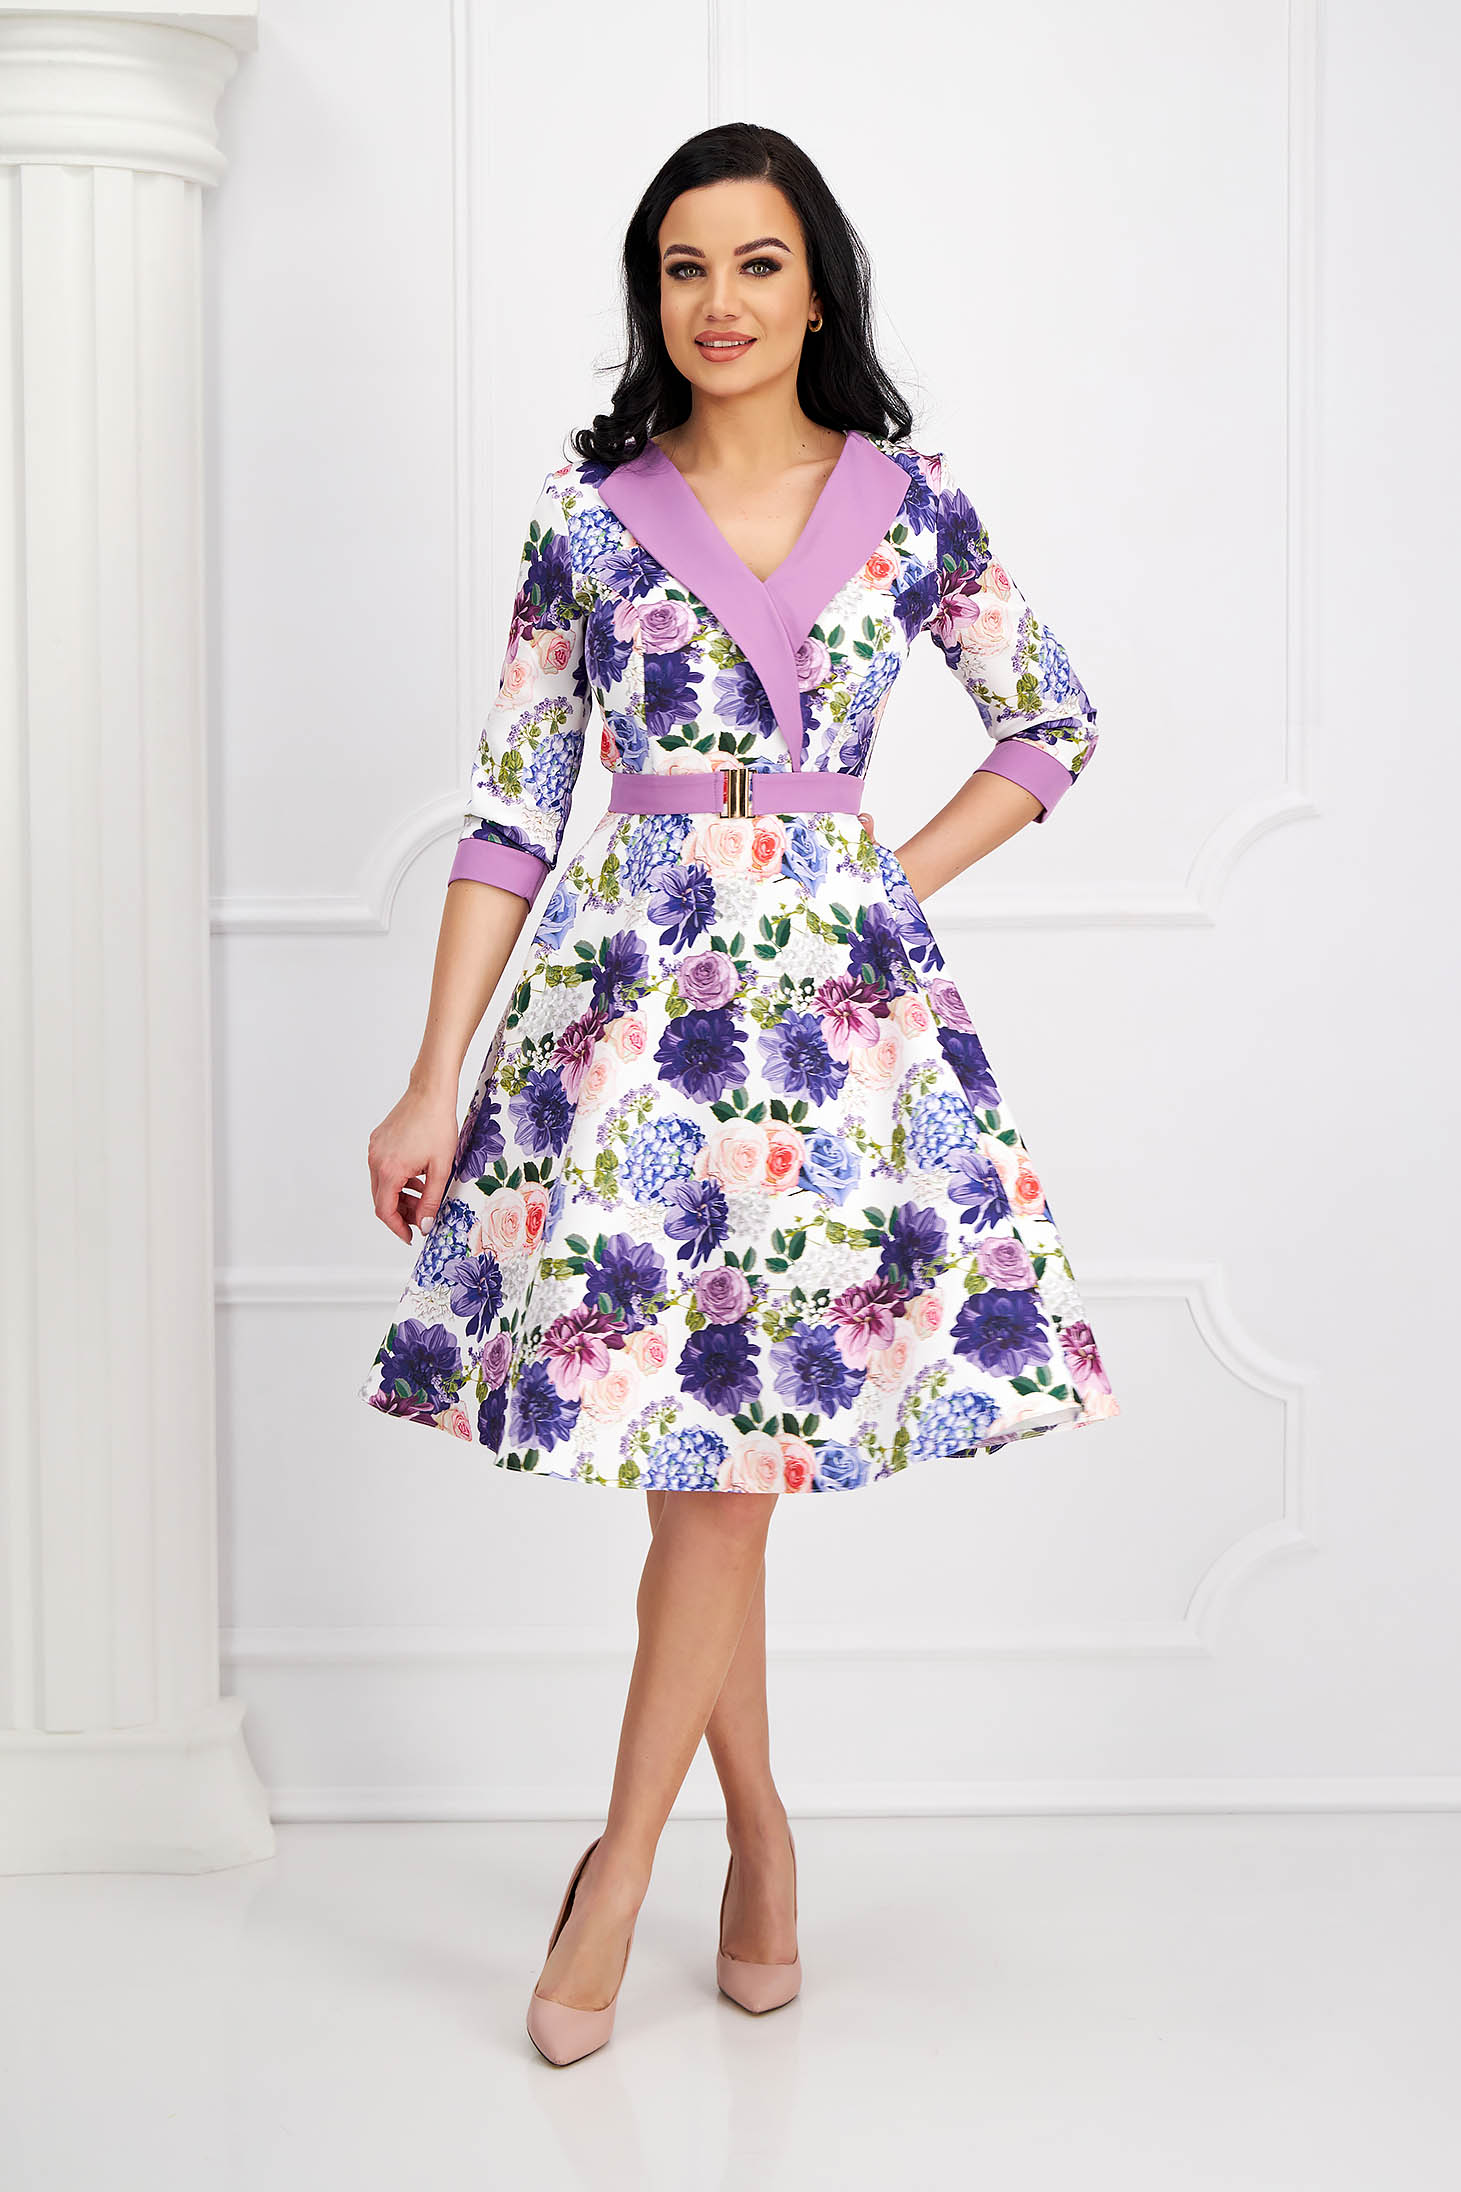 Dress made from slightly elastic fabric in a flared style with belt accessory and digital floral print - StarShinerS 1 - StarShinerS.com